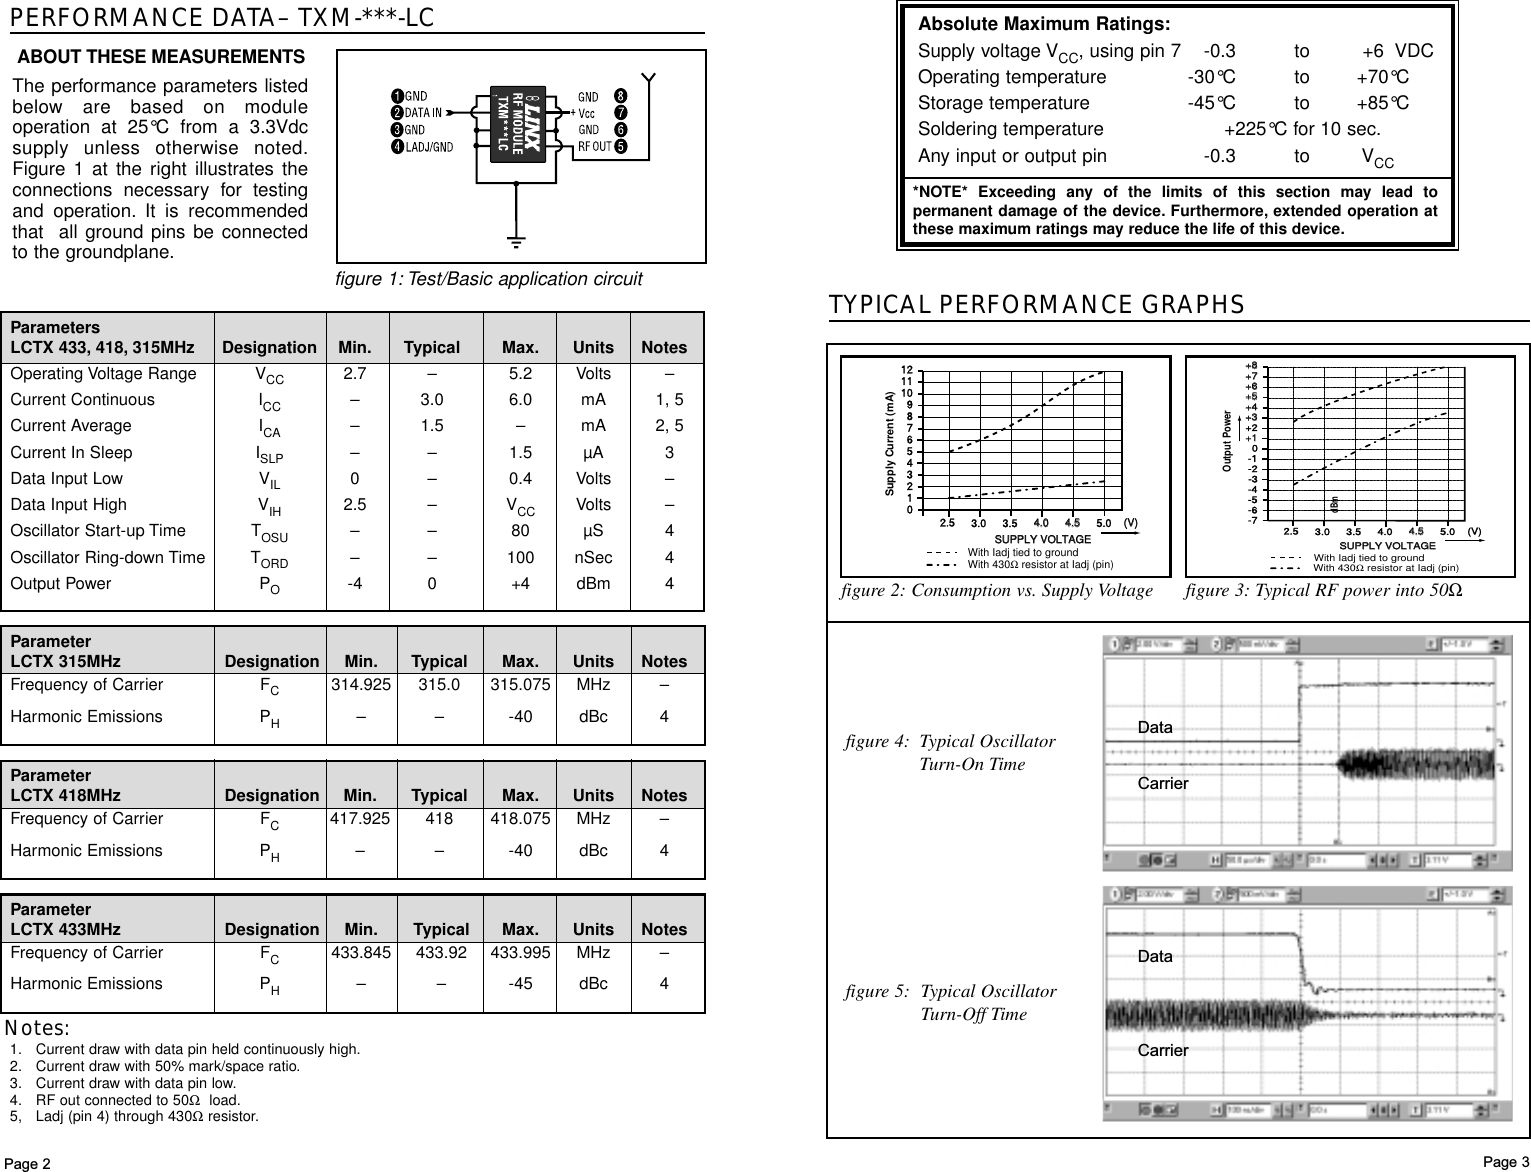 Page 3PERFORMANCE DATA– TXM-***-LCPage 2ParameterLCTX 418MHz Designation Min. Typical Max. Units Notes    Frequency of Carrier FC417.925 418 418.075 MHz –Harmonic Emissions PH– – -40 dBc 4ParameterLCTX 315MHz Designation Min. Typical Max. Units NotesFrequency of Carrier FC314.925 315.0 315.075 MHz –Harmonic Emissions PH––-40 dBc 4ParameterLCTX 433MHz Designation Min. Typical Max. Units Notes    Frequency of Carrier FC433.845 433.92 433.995 MHz –Harmonic Emissions PH––-45 dBc 4figure 1: Test/Basic application circuitABOUT THESE MEASUREMENTSThe performance parameters listedbelow are based on moduleoperation at 25°C from a 3.3Vdcsupply unless otherwise noted.Figure 1 at the right illustrates theconnections necessary for testingand operation. It is recommendedthat  all ground pins be connectedto the groundplane.Absolute Maximum Ratings:Supply voltage VCC, using pin 7 -0.3 to +6  VDCOperating temperature -30°C to +70°CStorage temperature -45°C to +85°CSoldering temperature +225°C for 10 sec.Any input or output pin -0.3 to VCC *NOTE* Exceeding any of the limits of this section may lead topermanent damage of the device. Furthermore, extended operation atthese maximum ratings may reduce the life of this device.1. Current draw with data pin held continuously high.2. Current draw with 50% mark/space ratio.3. Current draw with data pin low.4. RF out connected to 50Ωload.5, Ladj (pin 4) through 430Ωresistor.Notes:ParametersLCTX 433, 418, 315MHz Designation Min. Typical Max. Units Notes   Operating Voltage Range  VCC 2.7 –5.2 Volts –Current Continuous ICC –3.0 6.0 mA 1, 5Current Average ICA –1.5 –mA 2, 5Current In Sleep ISLP –– 1.5 µA 3Data Input Low VIL 0–0.4 Volts –Data Input High VIH 2.5 –VCC Volts –Oscillator Start-up Time TOSU –– 80 µS 4Oscillator Ring-down Time TORD ––100 nSec 4Output Power PO-4 0 +4 dBm 40-1-4-5-6-7 2.5 3.0 3.5 4.0 4.5-2-3SUPPLY VOLTAGE+1+3+2+4+5+6+7+85.0 (V)2.5 3.0 3.5 4.04.0 4.54.5 5.0 (V)(V)SUPPLY VOLTAGESUPPLY VOLTAGE1324567891011120With 430Ω resistor at Iadj (pin)With Iadj tied to groundSupply Current (mA)0-1-4-5-6-7 2.5 3.0 3.5 4.0 4.54.5-2-3SUPPLY VOLTAGESUPPLY VOLTAGE+1+1+3+3+2+4+4+5+5+6+6+7+7+8+85.0 (V)2.5 3.0 3.5 4.0 4.5 5.0 (V)SUPPLY VOLTAGE1324567891011120dBmWith 430Ω resistor at Iadj (pin)With Iadj tied to groundpgOutput Powerfigure 4: Typical Oscillator Turn-On Timefigure 2: Consumption vs. Supply VoltageTYPICAL PERFORMANCE GRAPHSfigure 5: Typical Oscillator Turn-Off Timefigure 3: Typical RF power into 50ΩDataCarrierDataCarrier